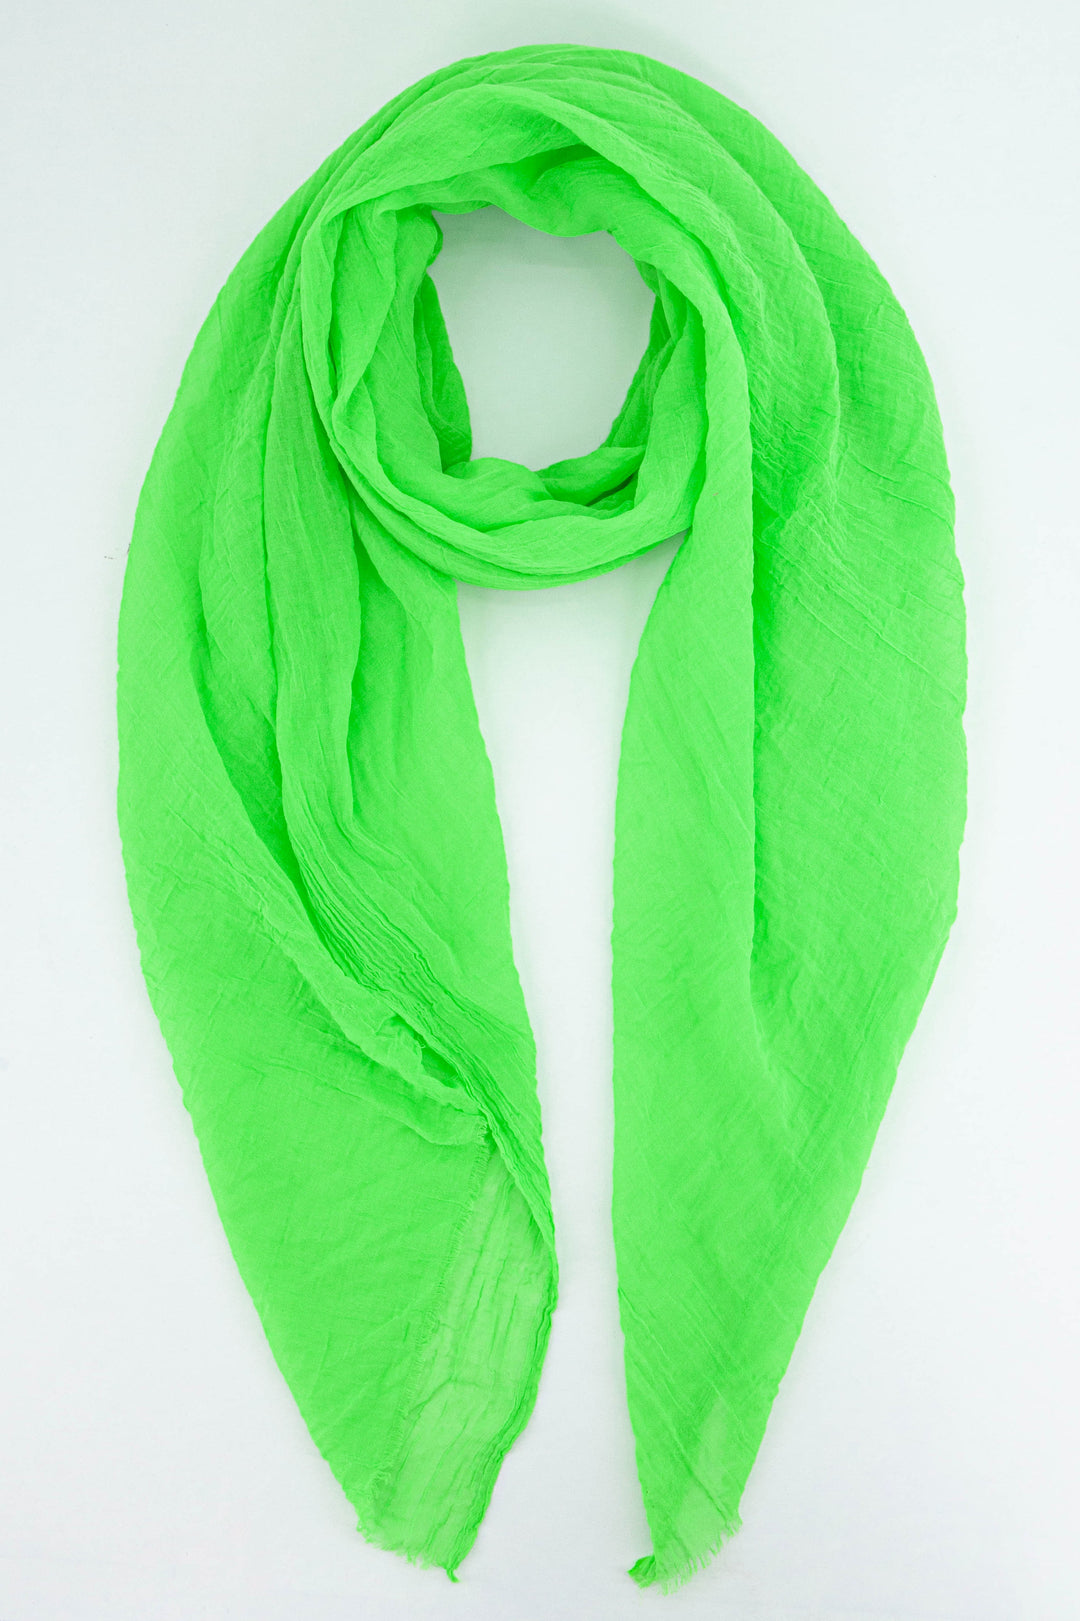 plain lime green lightweight summer scarf with a fringed edge